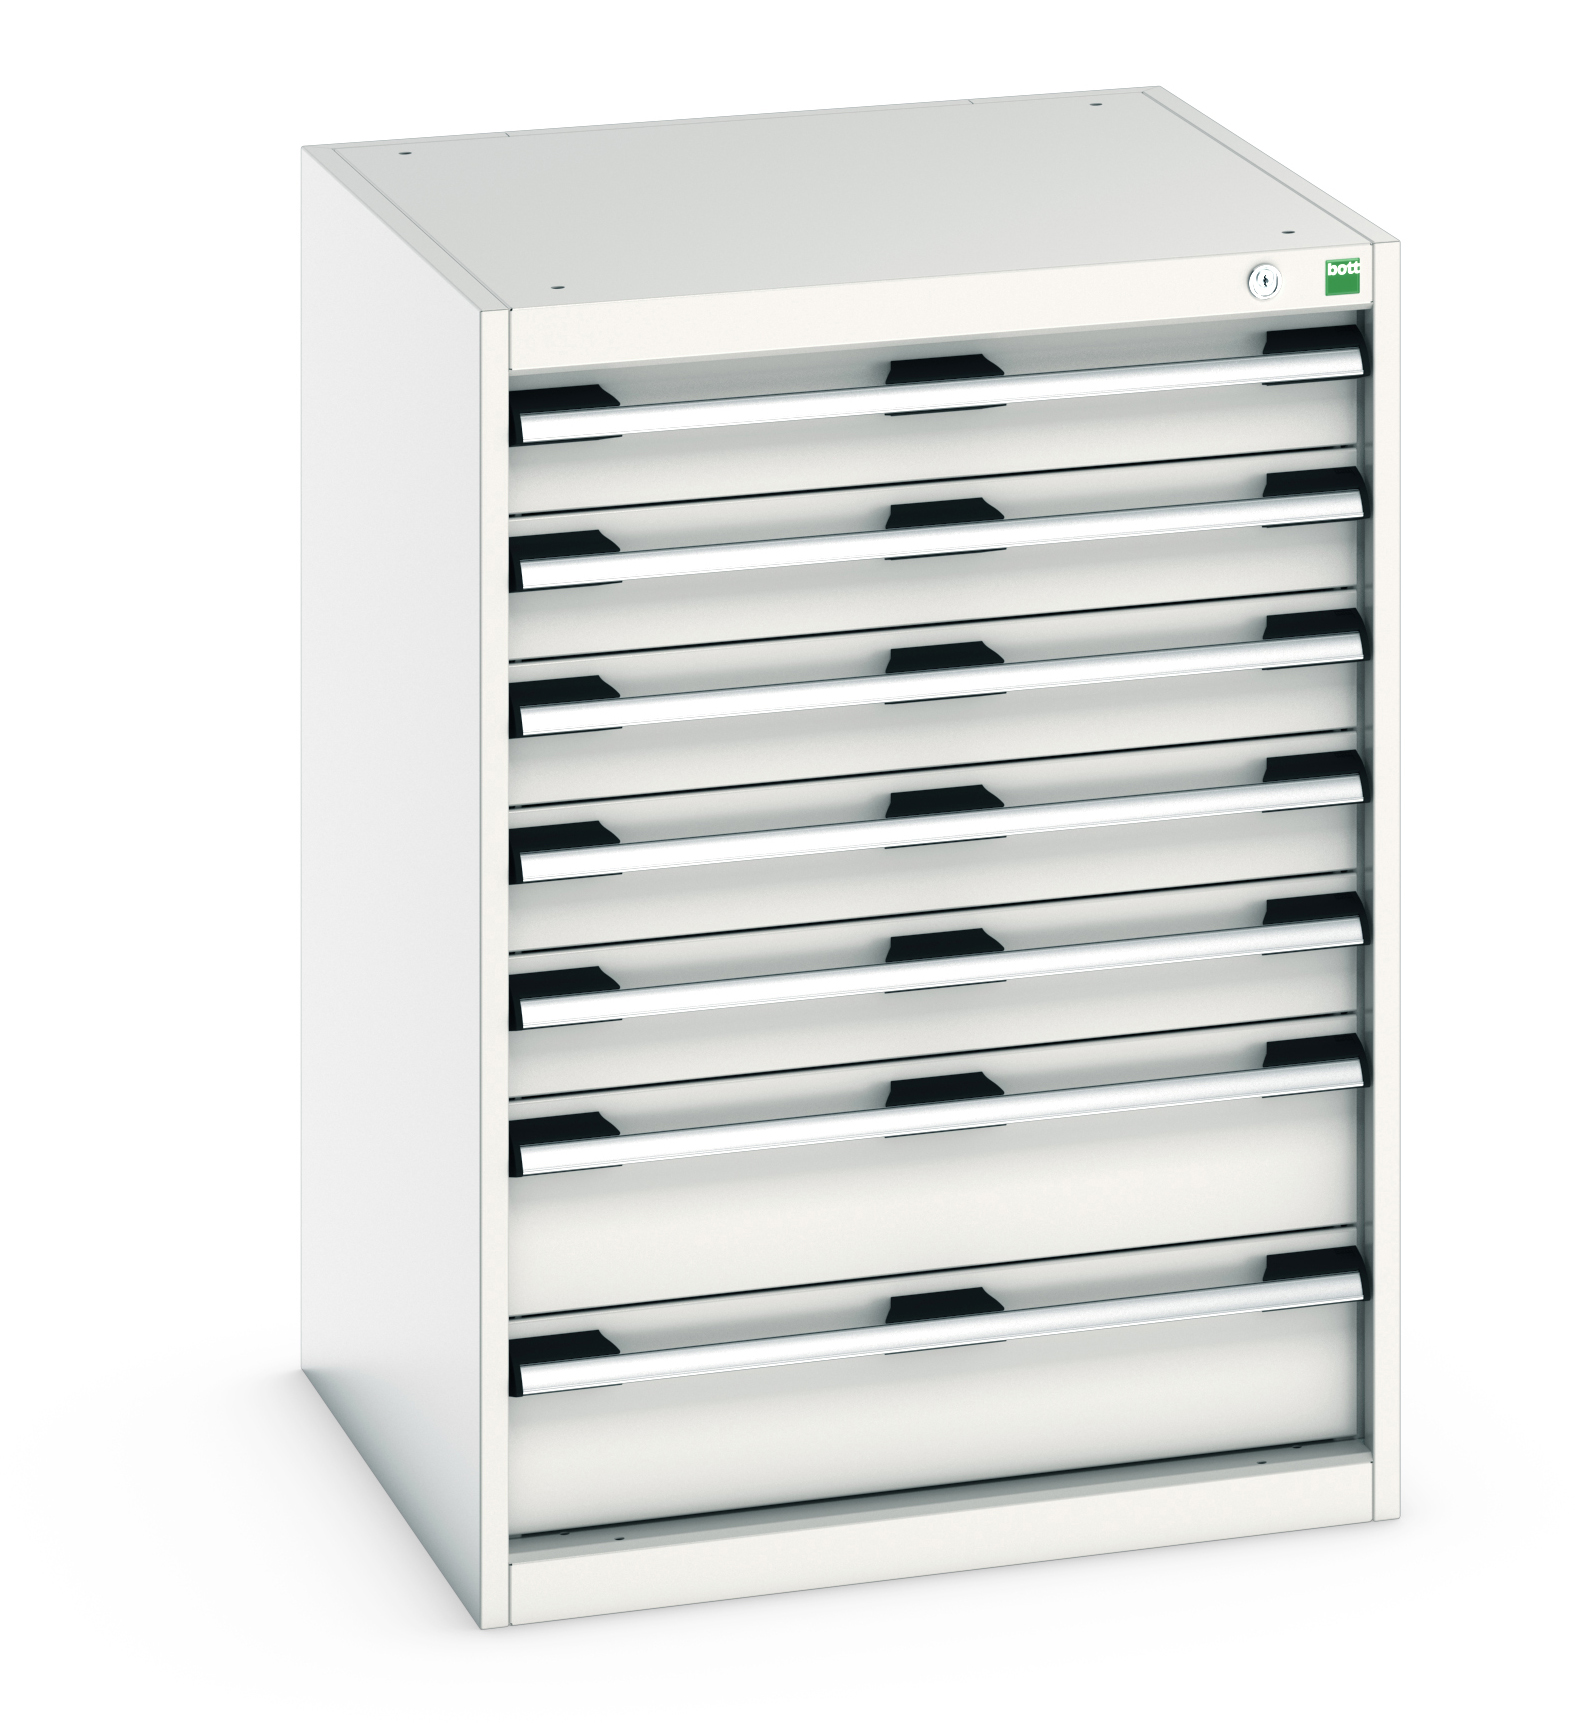 Bott Cubio Drawer Cabinet With 7 Drawers - 40019051.16V